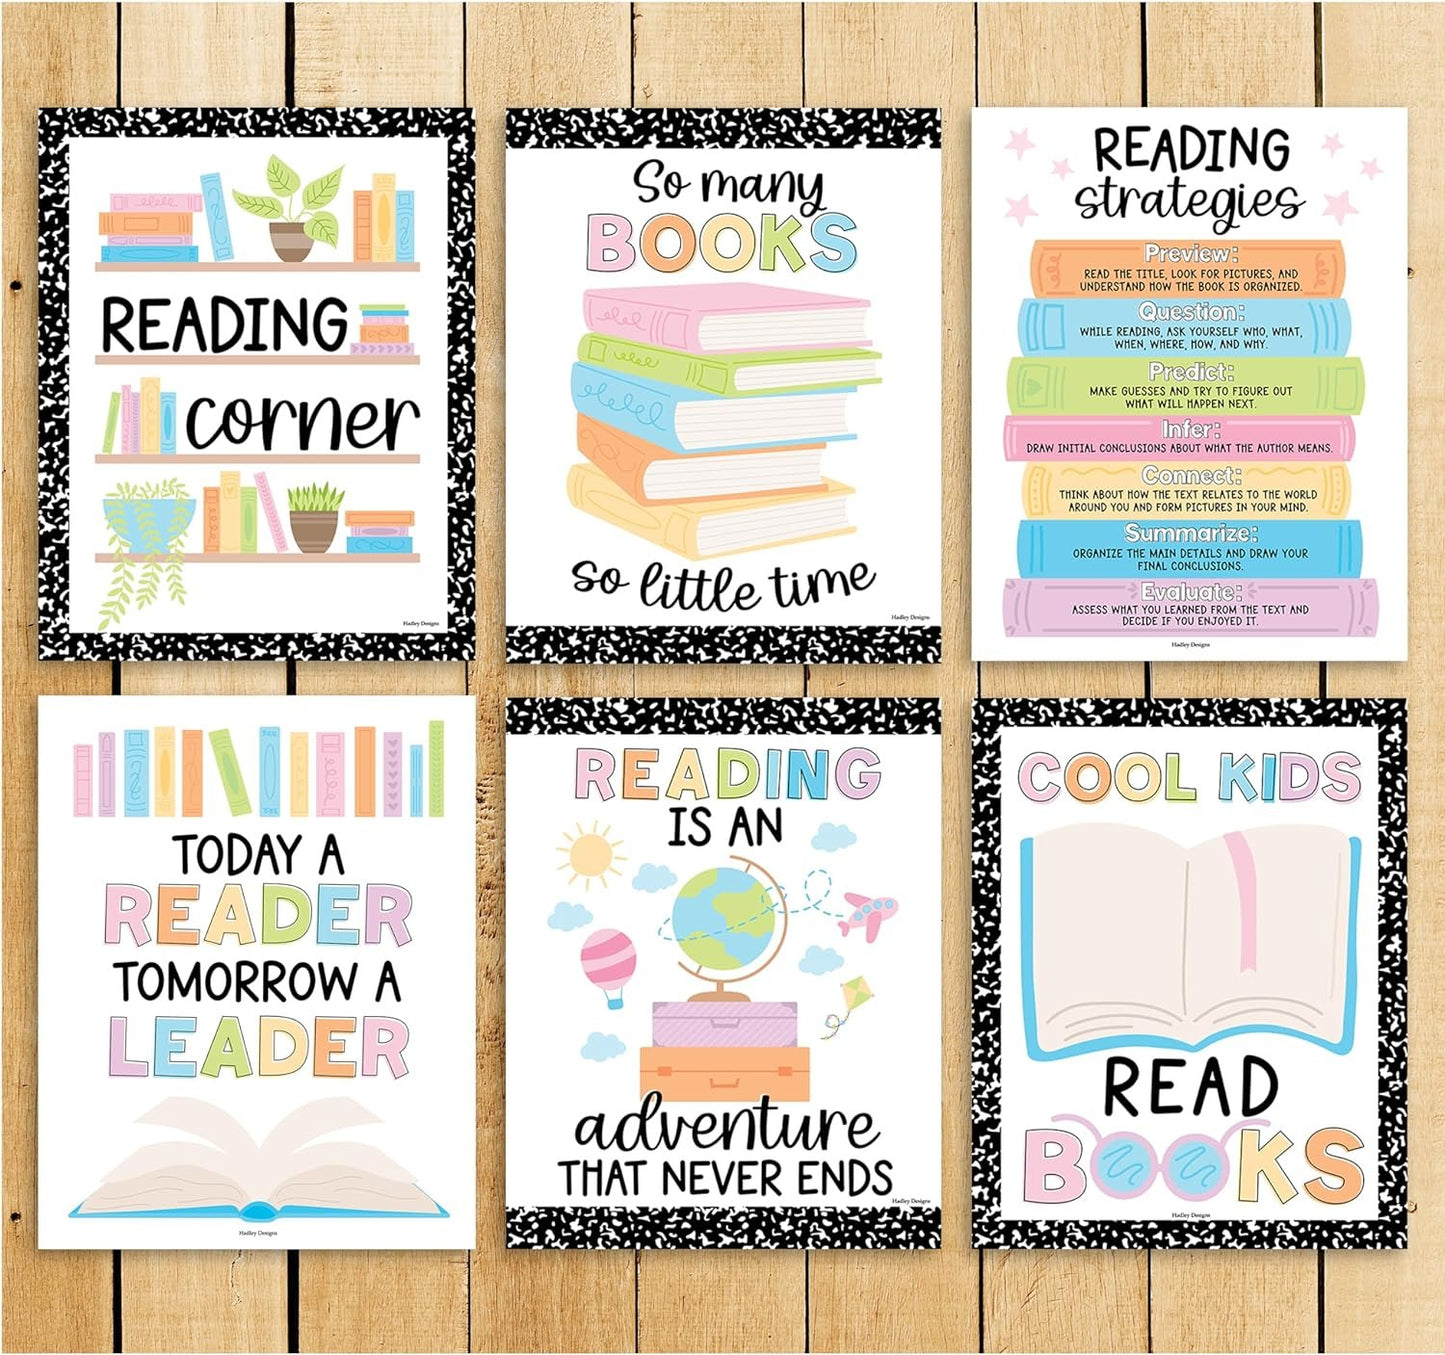 6 Colorful Reading Posters For Classroom Reading Corner - Reading Corner Decor For Classroom Library Posters, Reading Strategies Posters For Classroom Library Decor, Reading Classroom Decor, Read Sign